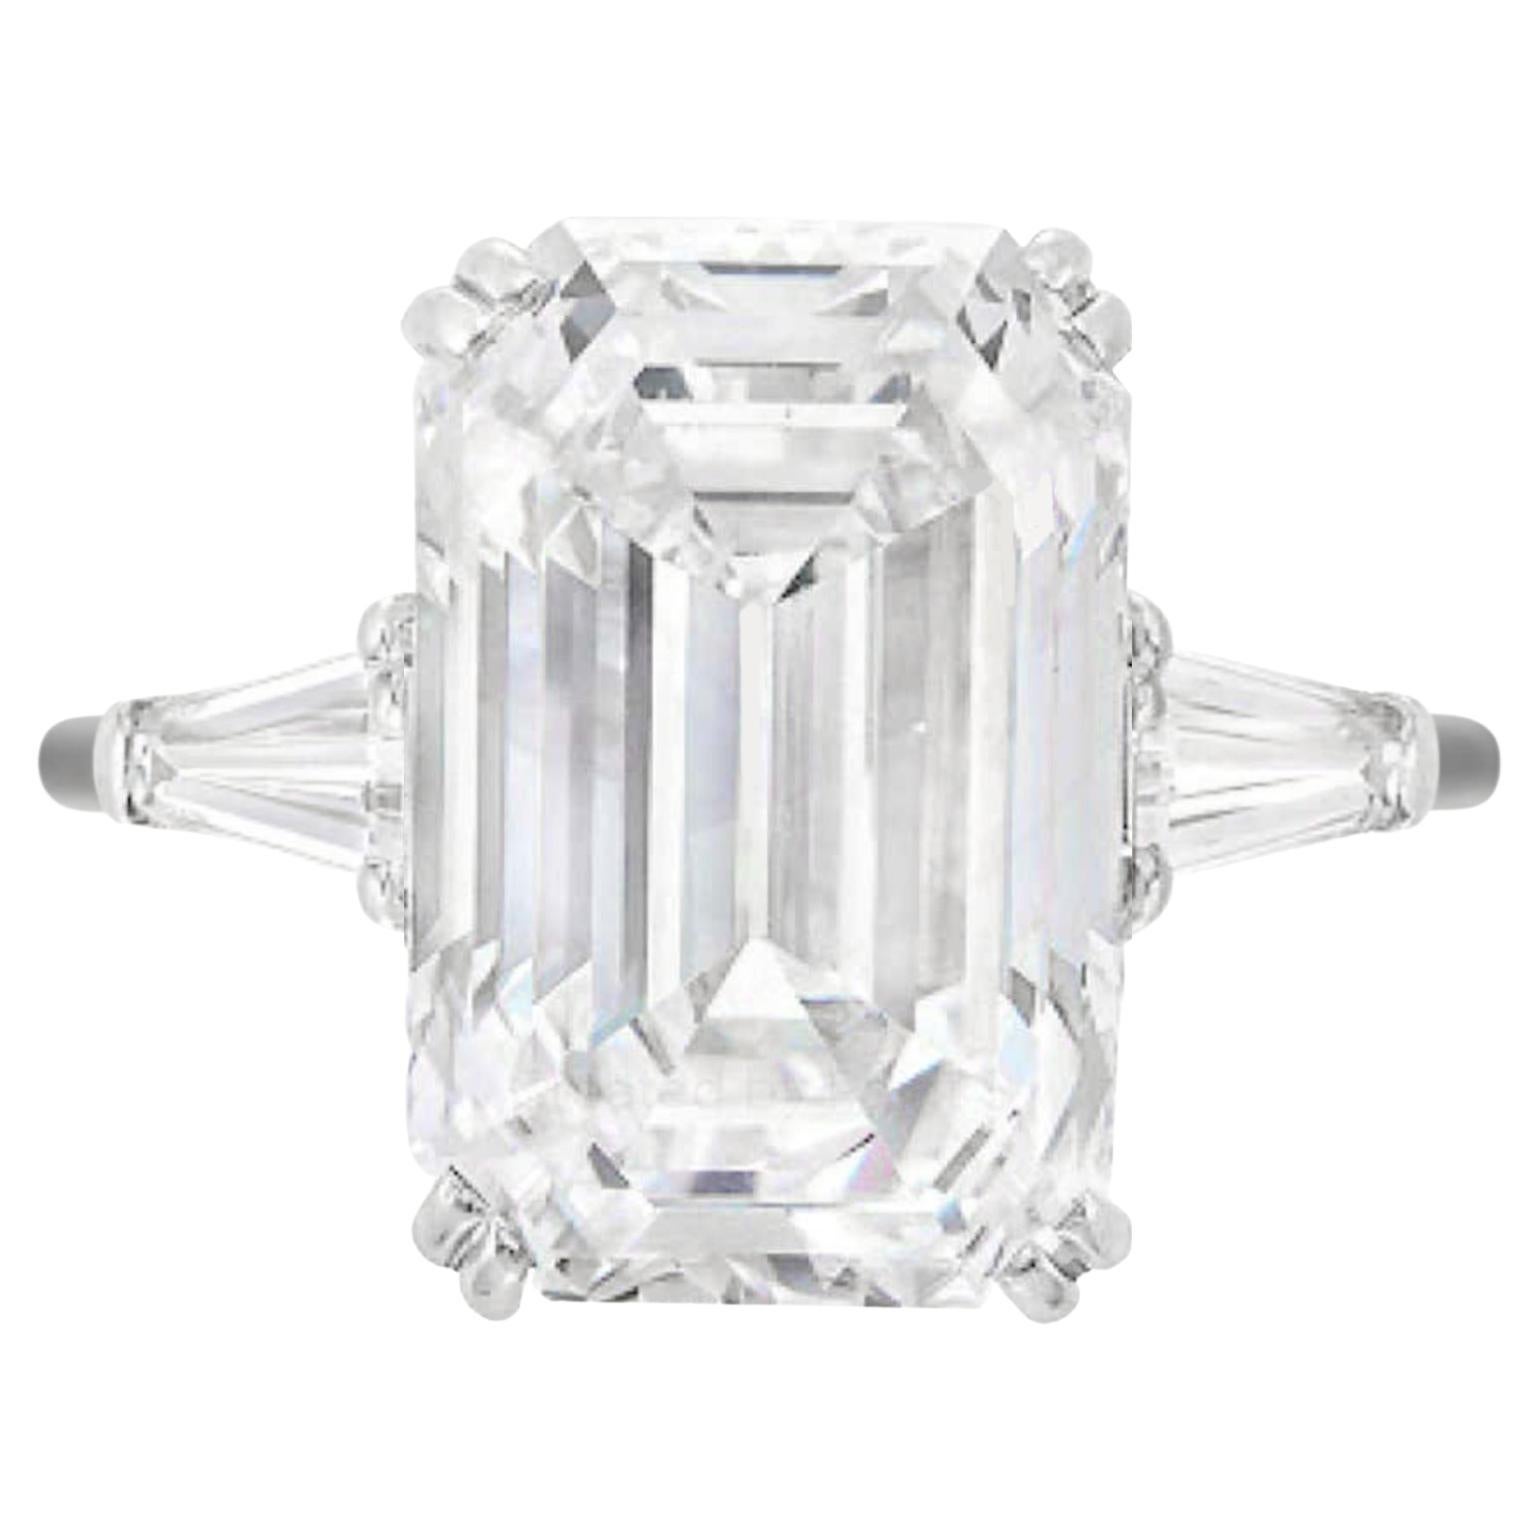 Flawless GIA Certified 4 Carat Emerald Cut Diamond Ring Investment Grade